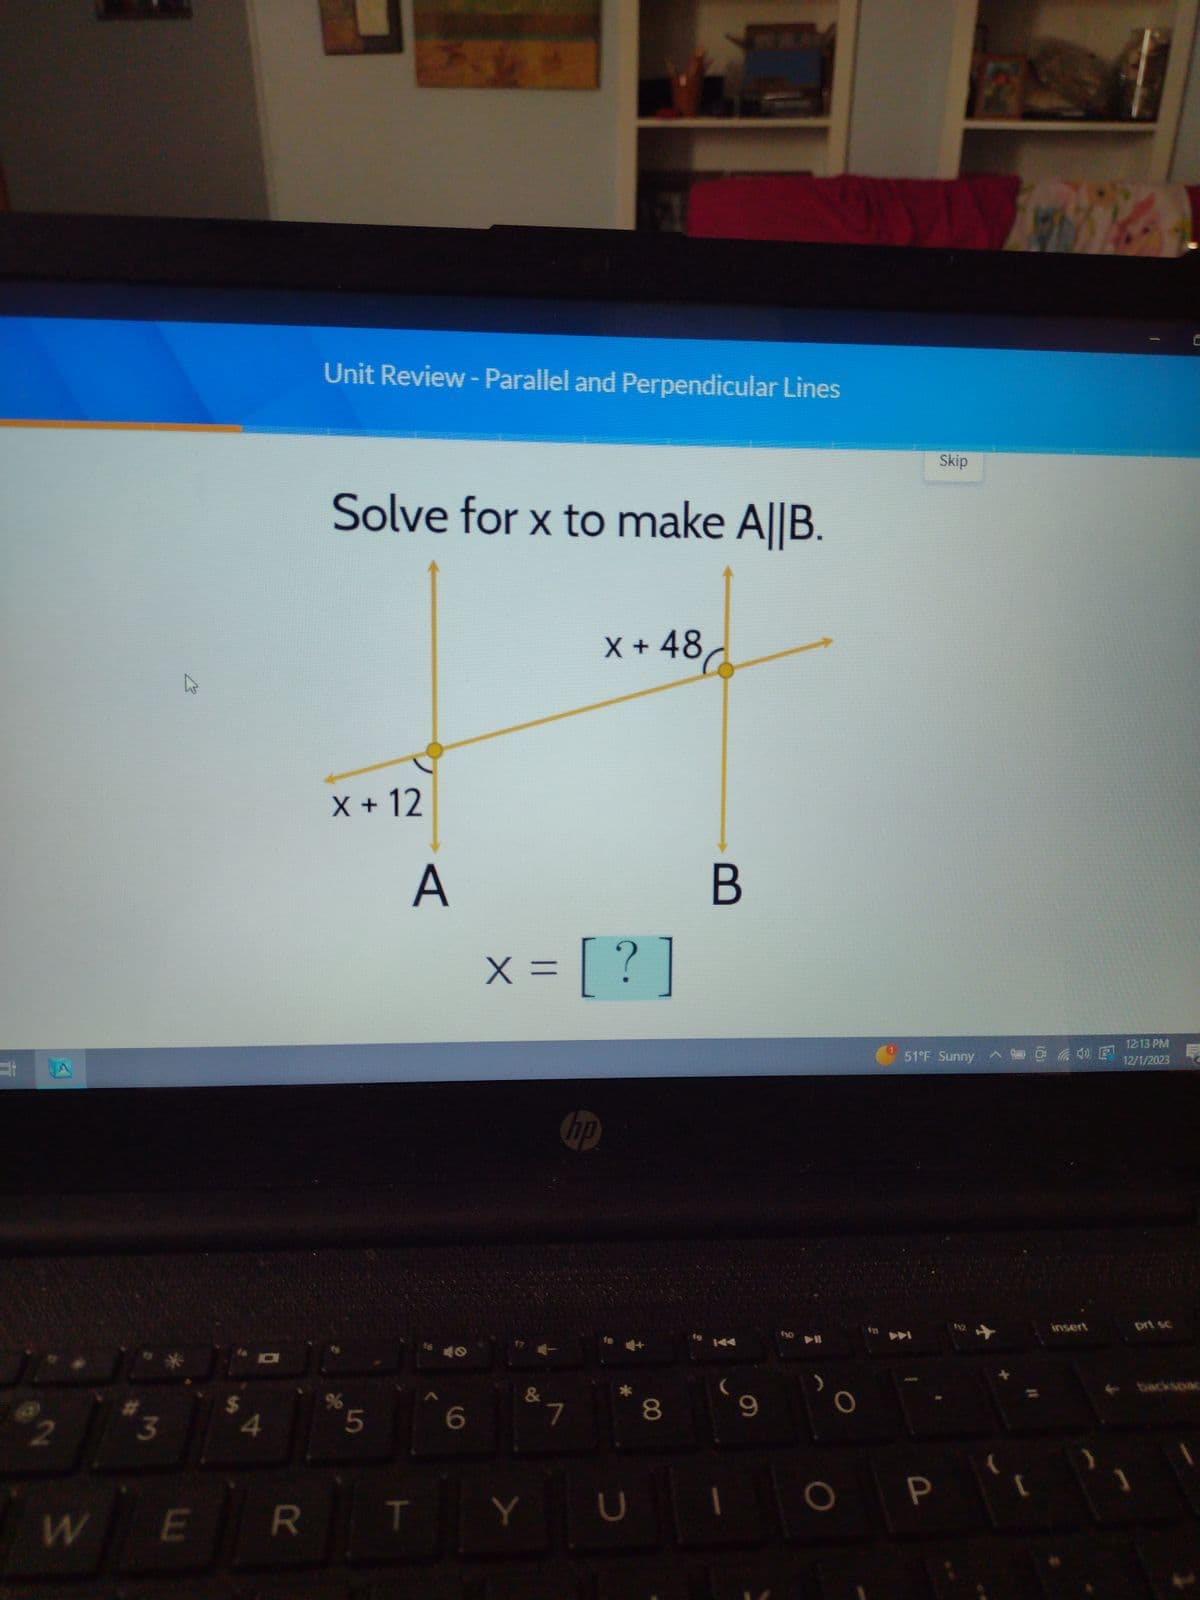 @2
3
4
$A
Unit Review - Parallel and Perpendicular Lines
Solve for x to make A||B.
X + 12
%
5
R
E
W
A
× = [ ? ]
&
Y
hp
X + 48
7
8
D
U ||
19
B
1
9
610
DI
O
Skip
51°F Sunny
P
WA
12:13 PM
4) E 12/1/2023
insert
prt sc